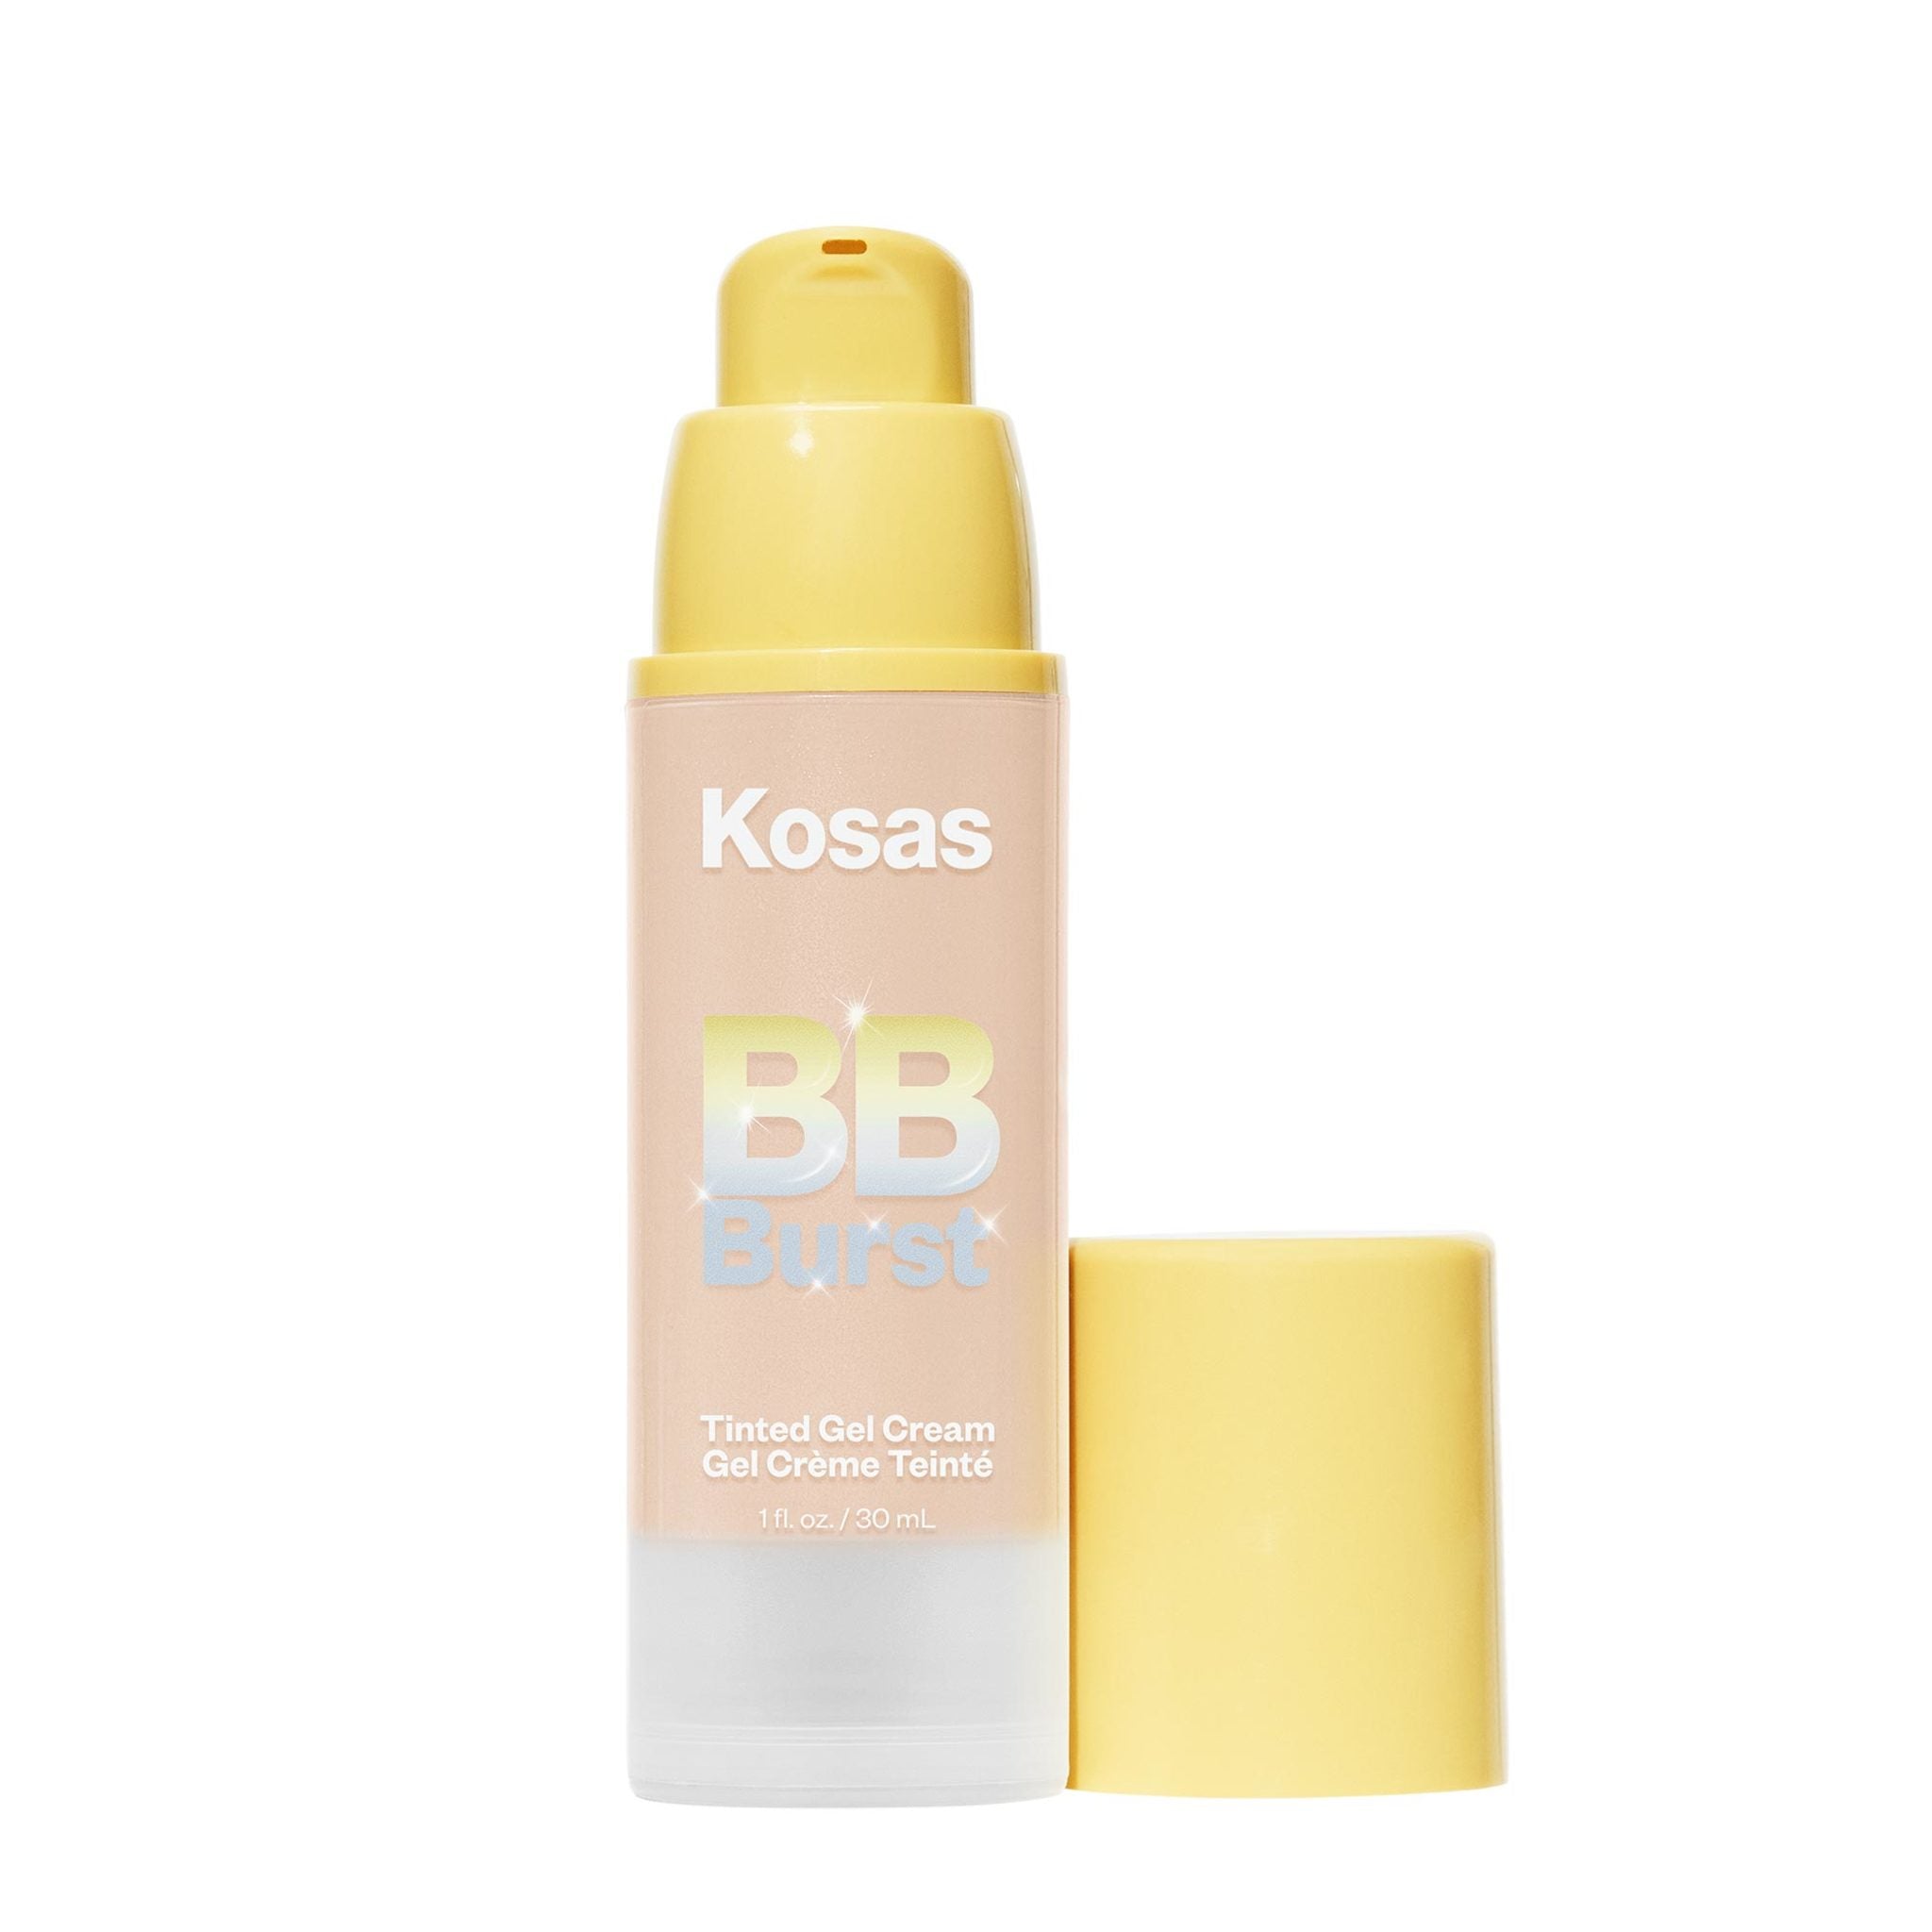 Kosas BB Burst Tinted Moisturizer Gel Cream Color/Shade variant: Light Cool 13 main image. This product is for light cool complexions